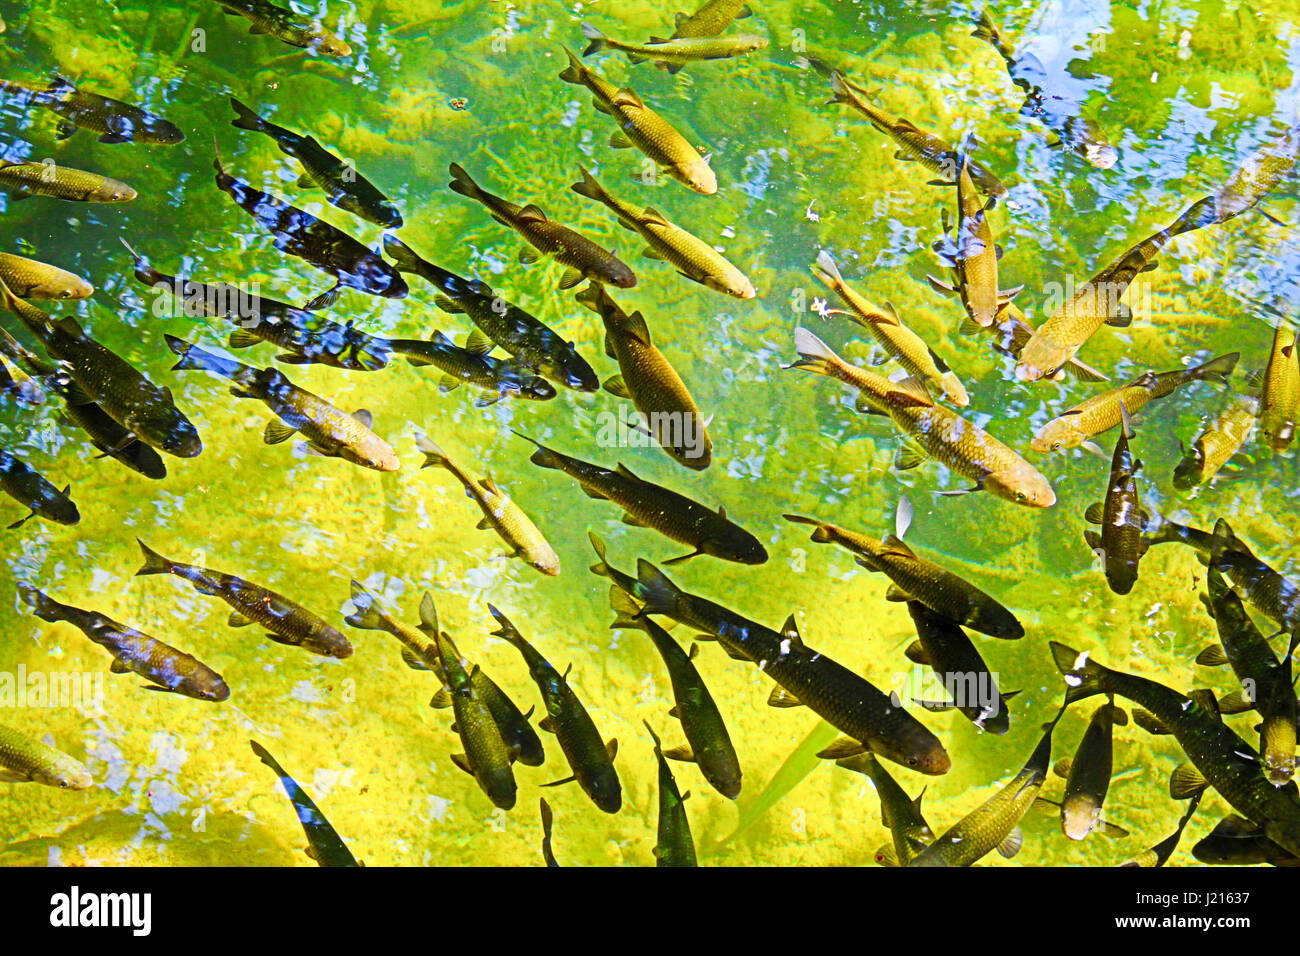 School of small fish swimming near the surface of the water Stock Photo